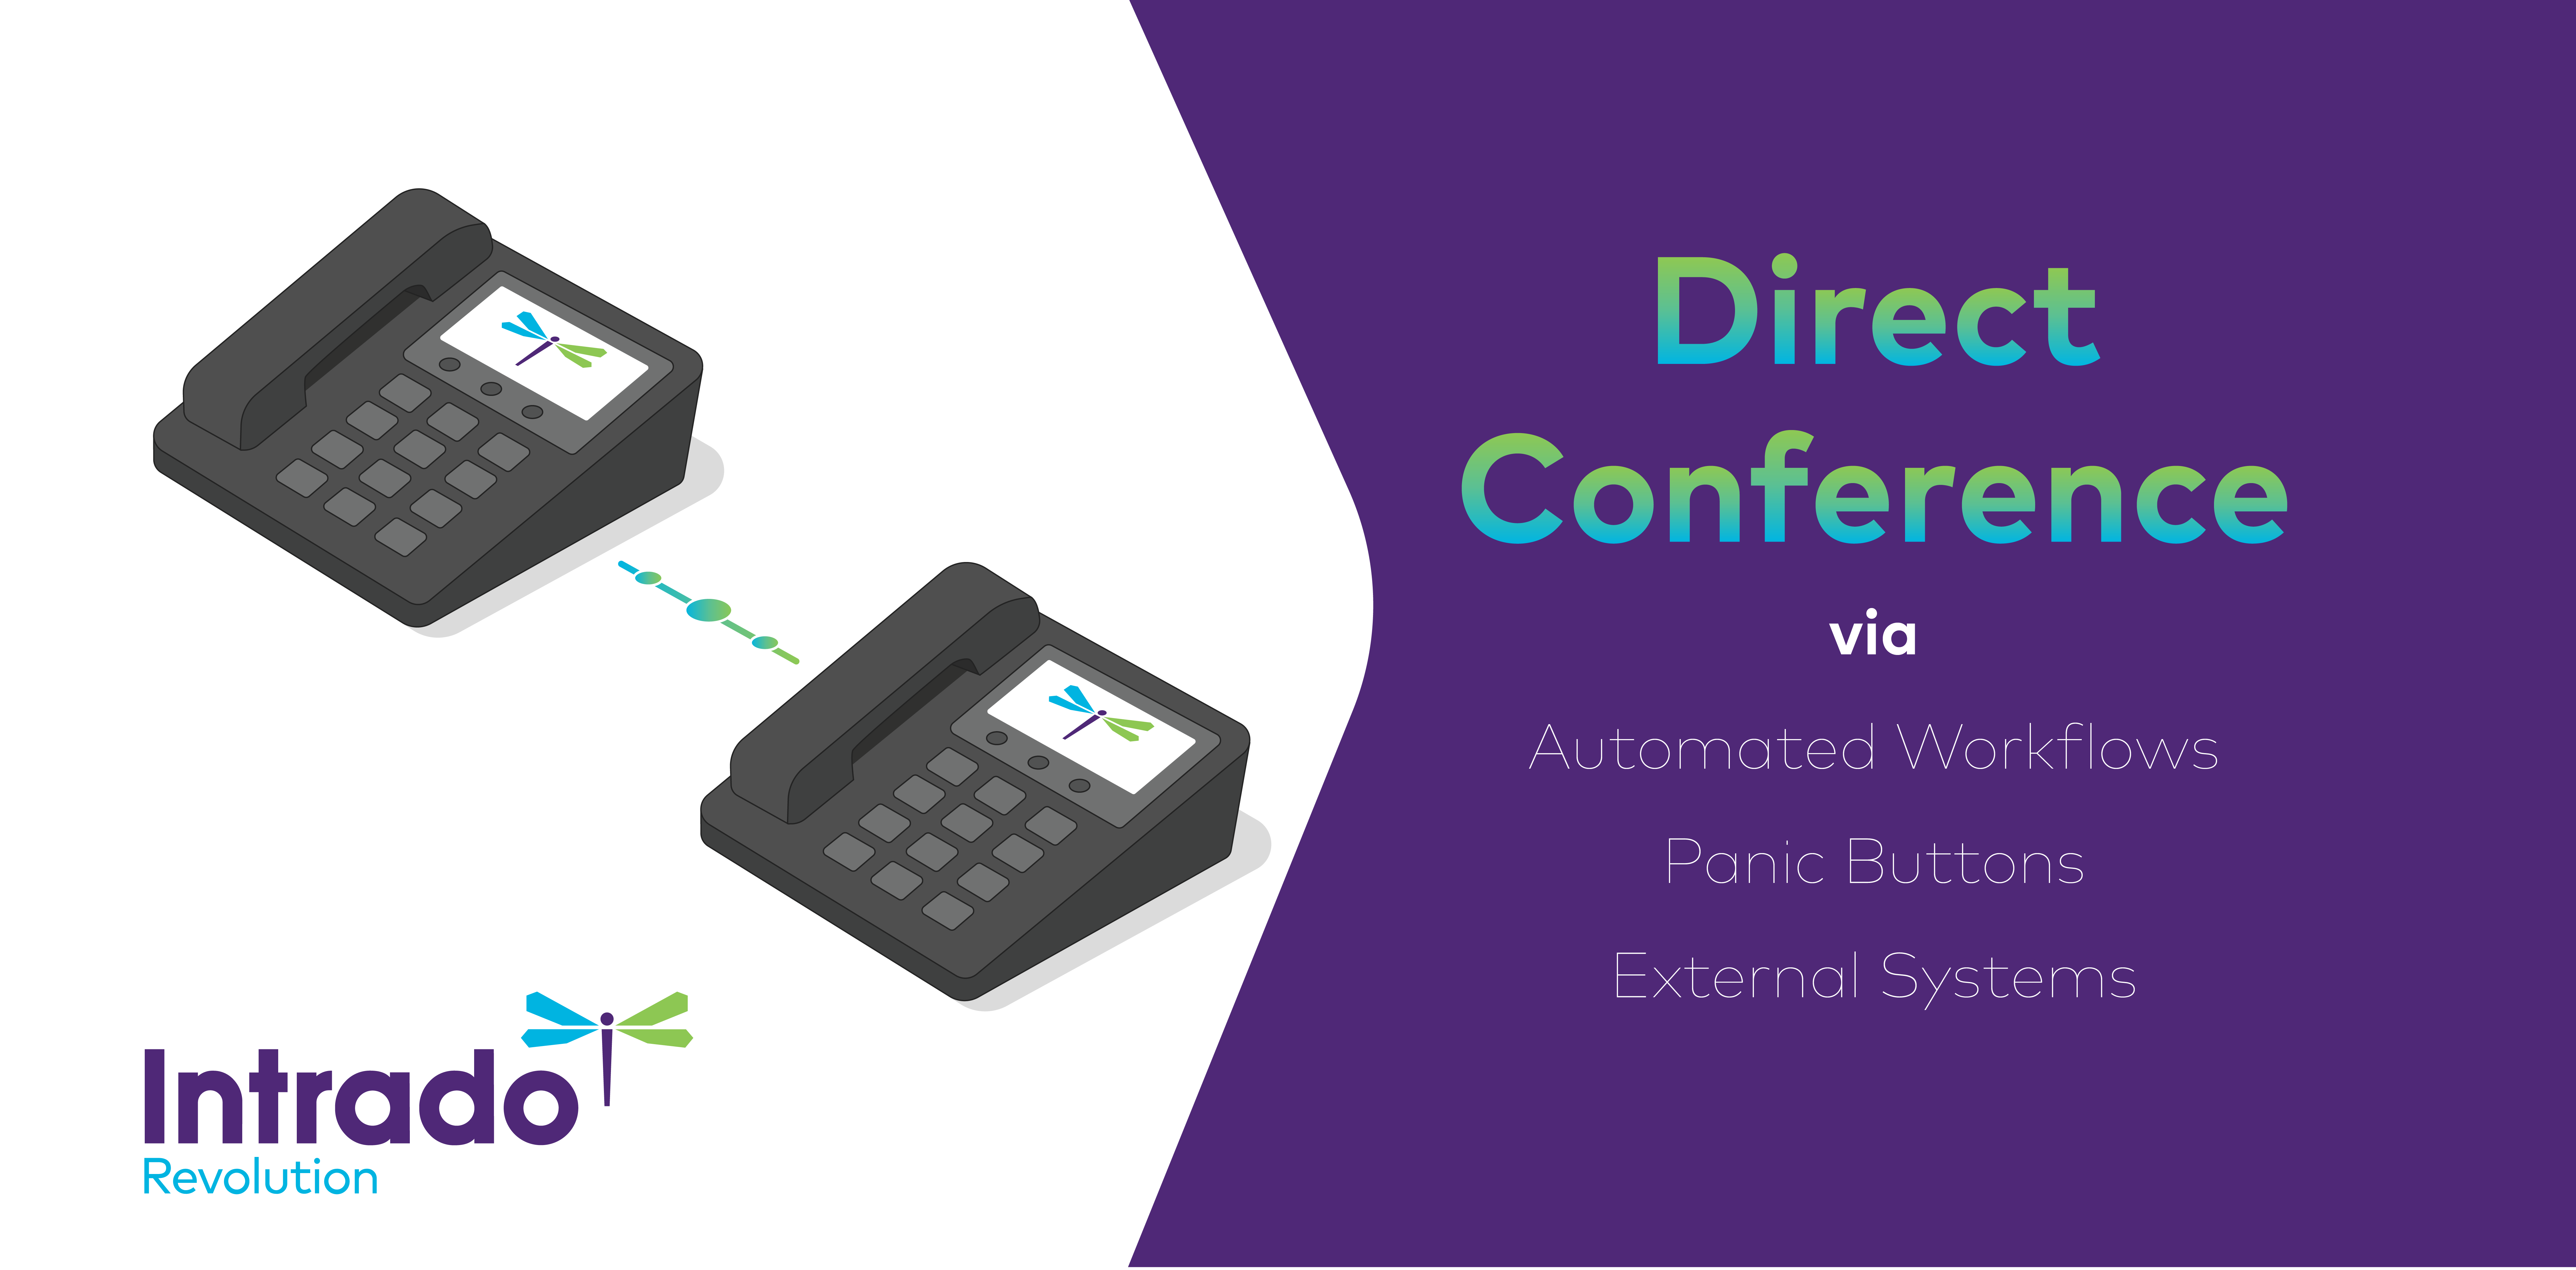 Direct Conference